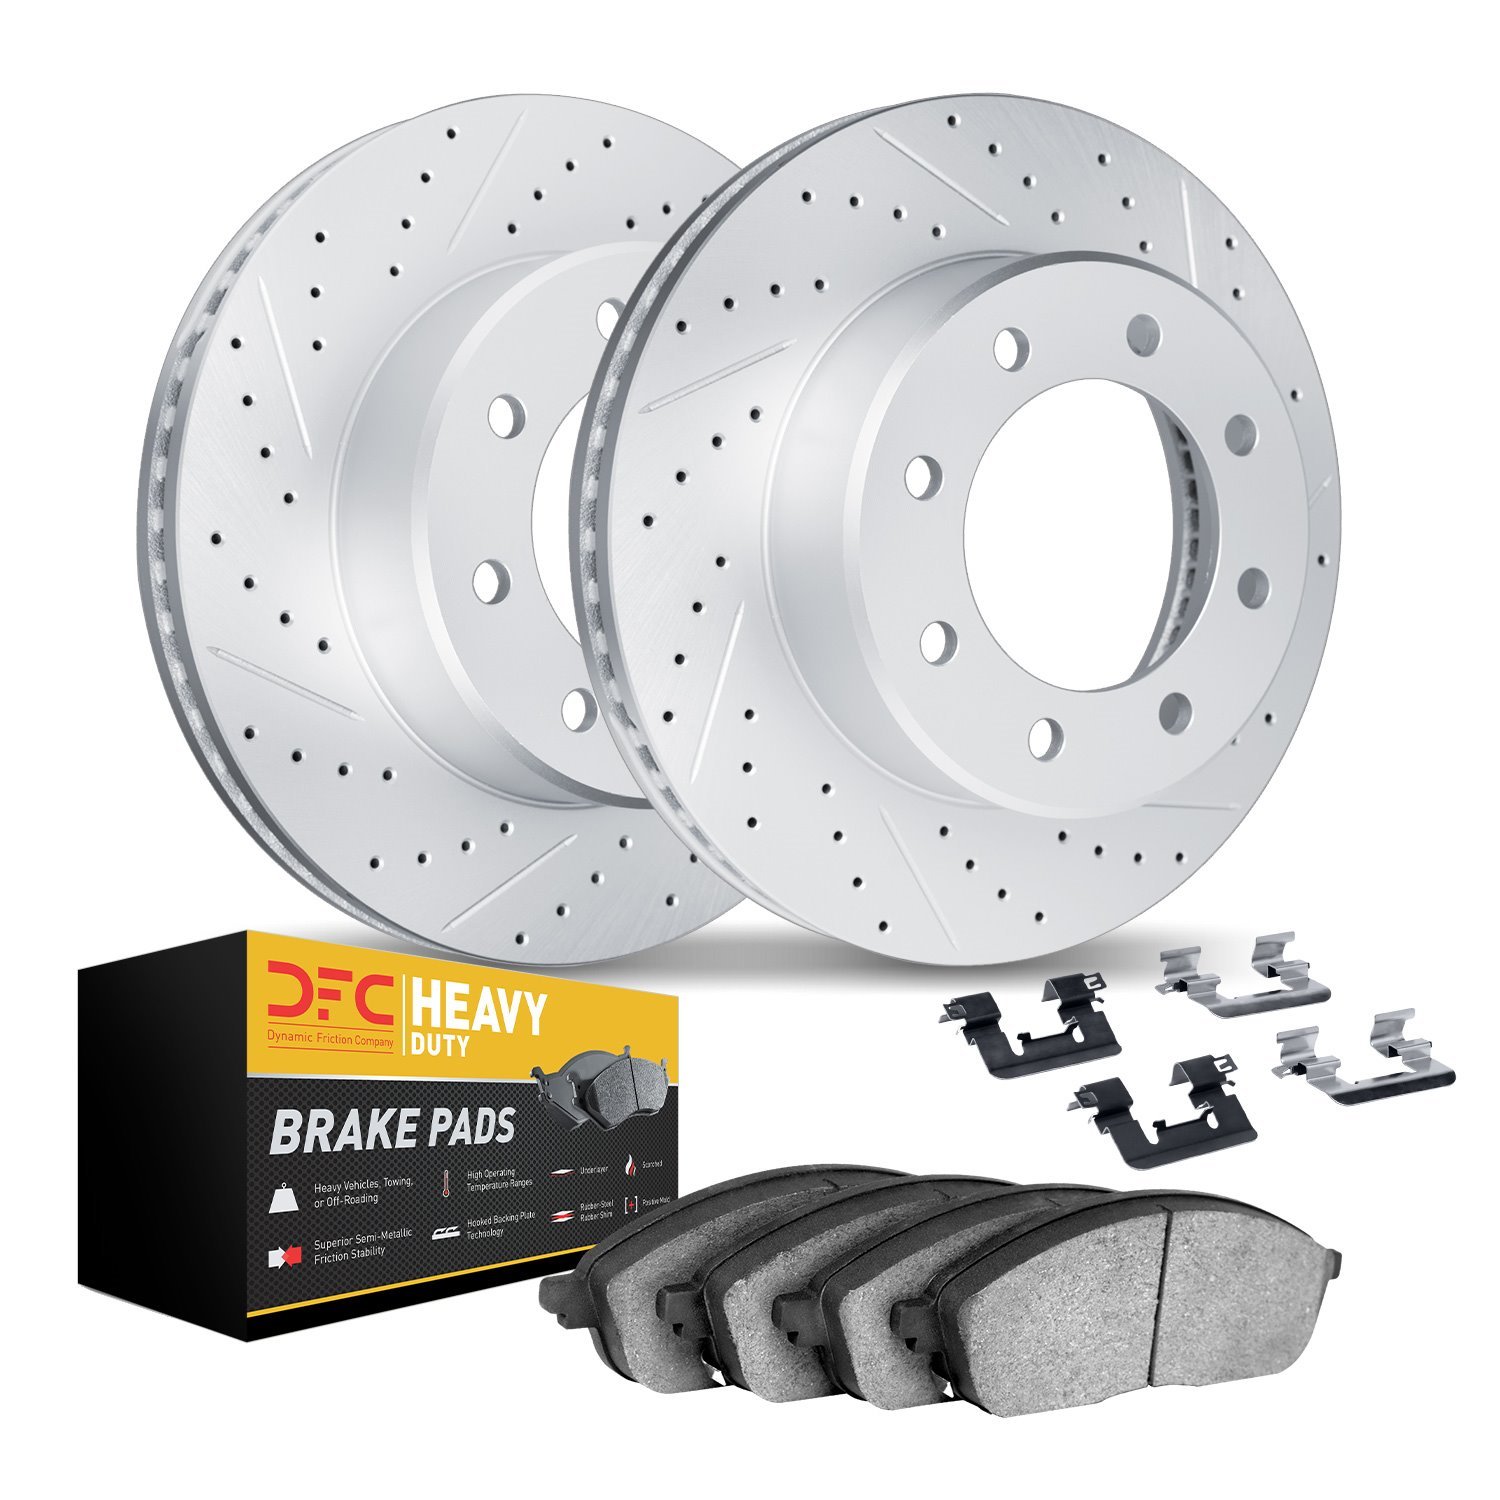 2212-48021 Geoperformance Drilled/Slotted Rotors w/Heavy-Duty Pads Kit & Hardware, 1999-2013 GM, Position: Rear